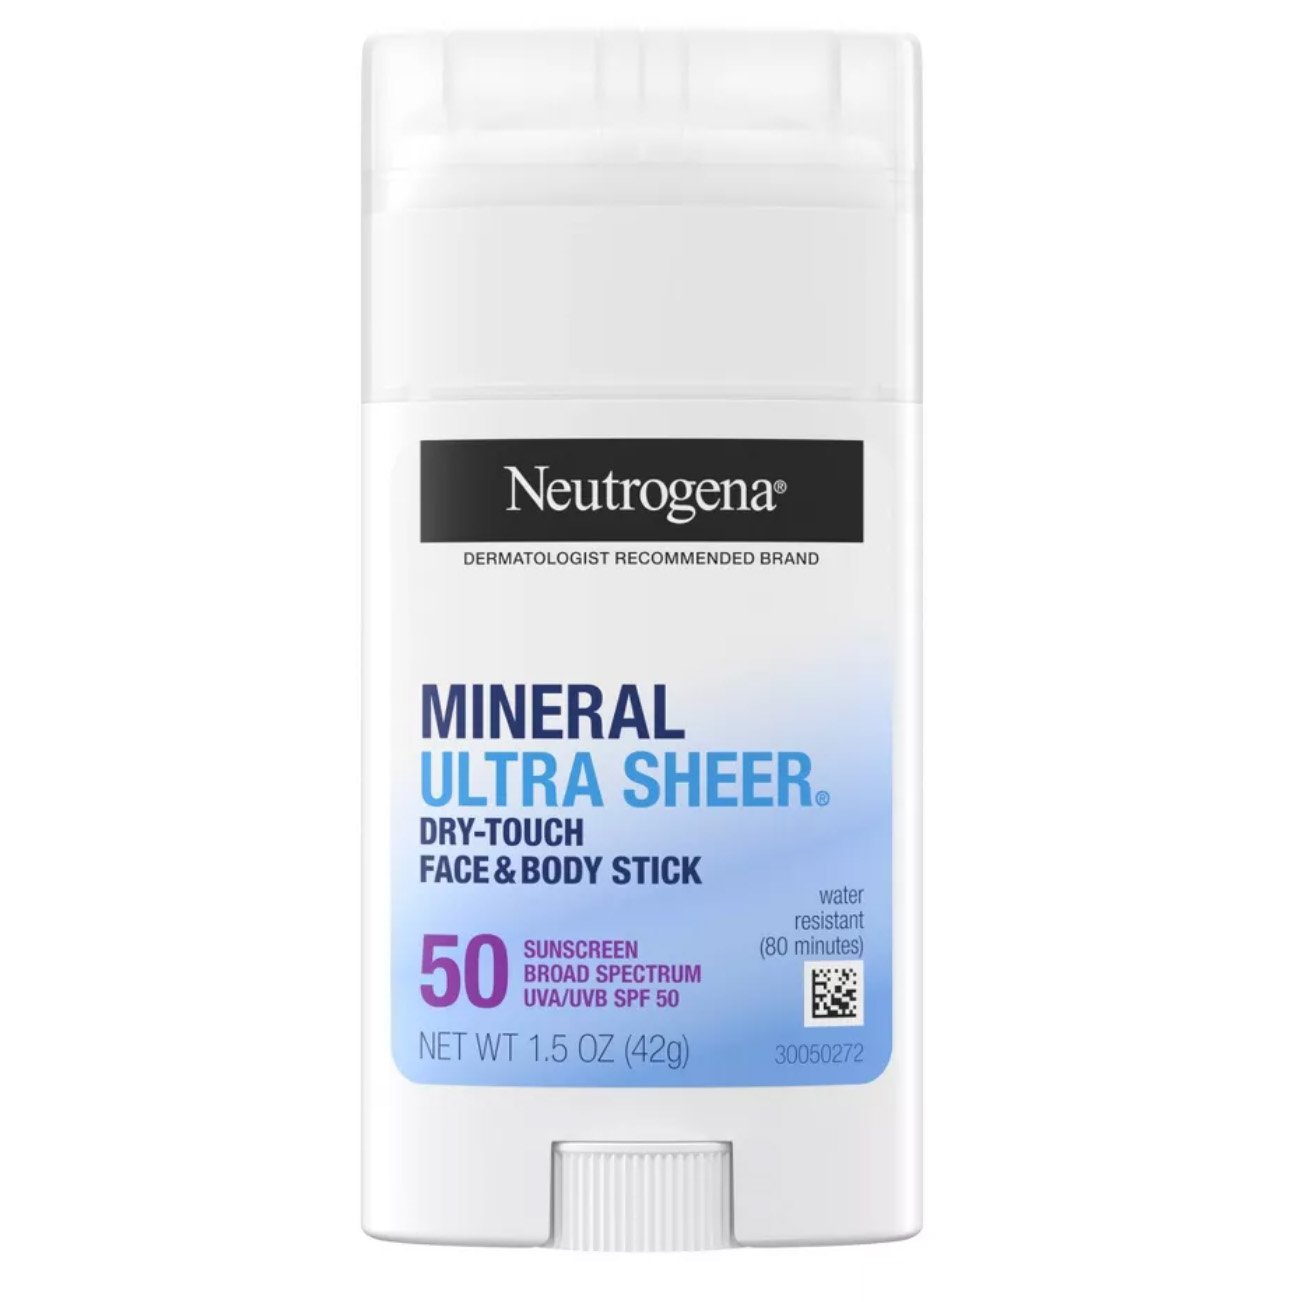 Neutrogena Mineral Ultra Sheer Face and Body Sunscreen Stick